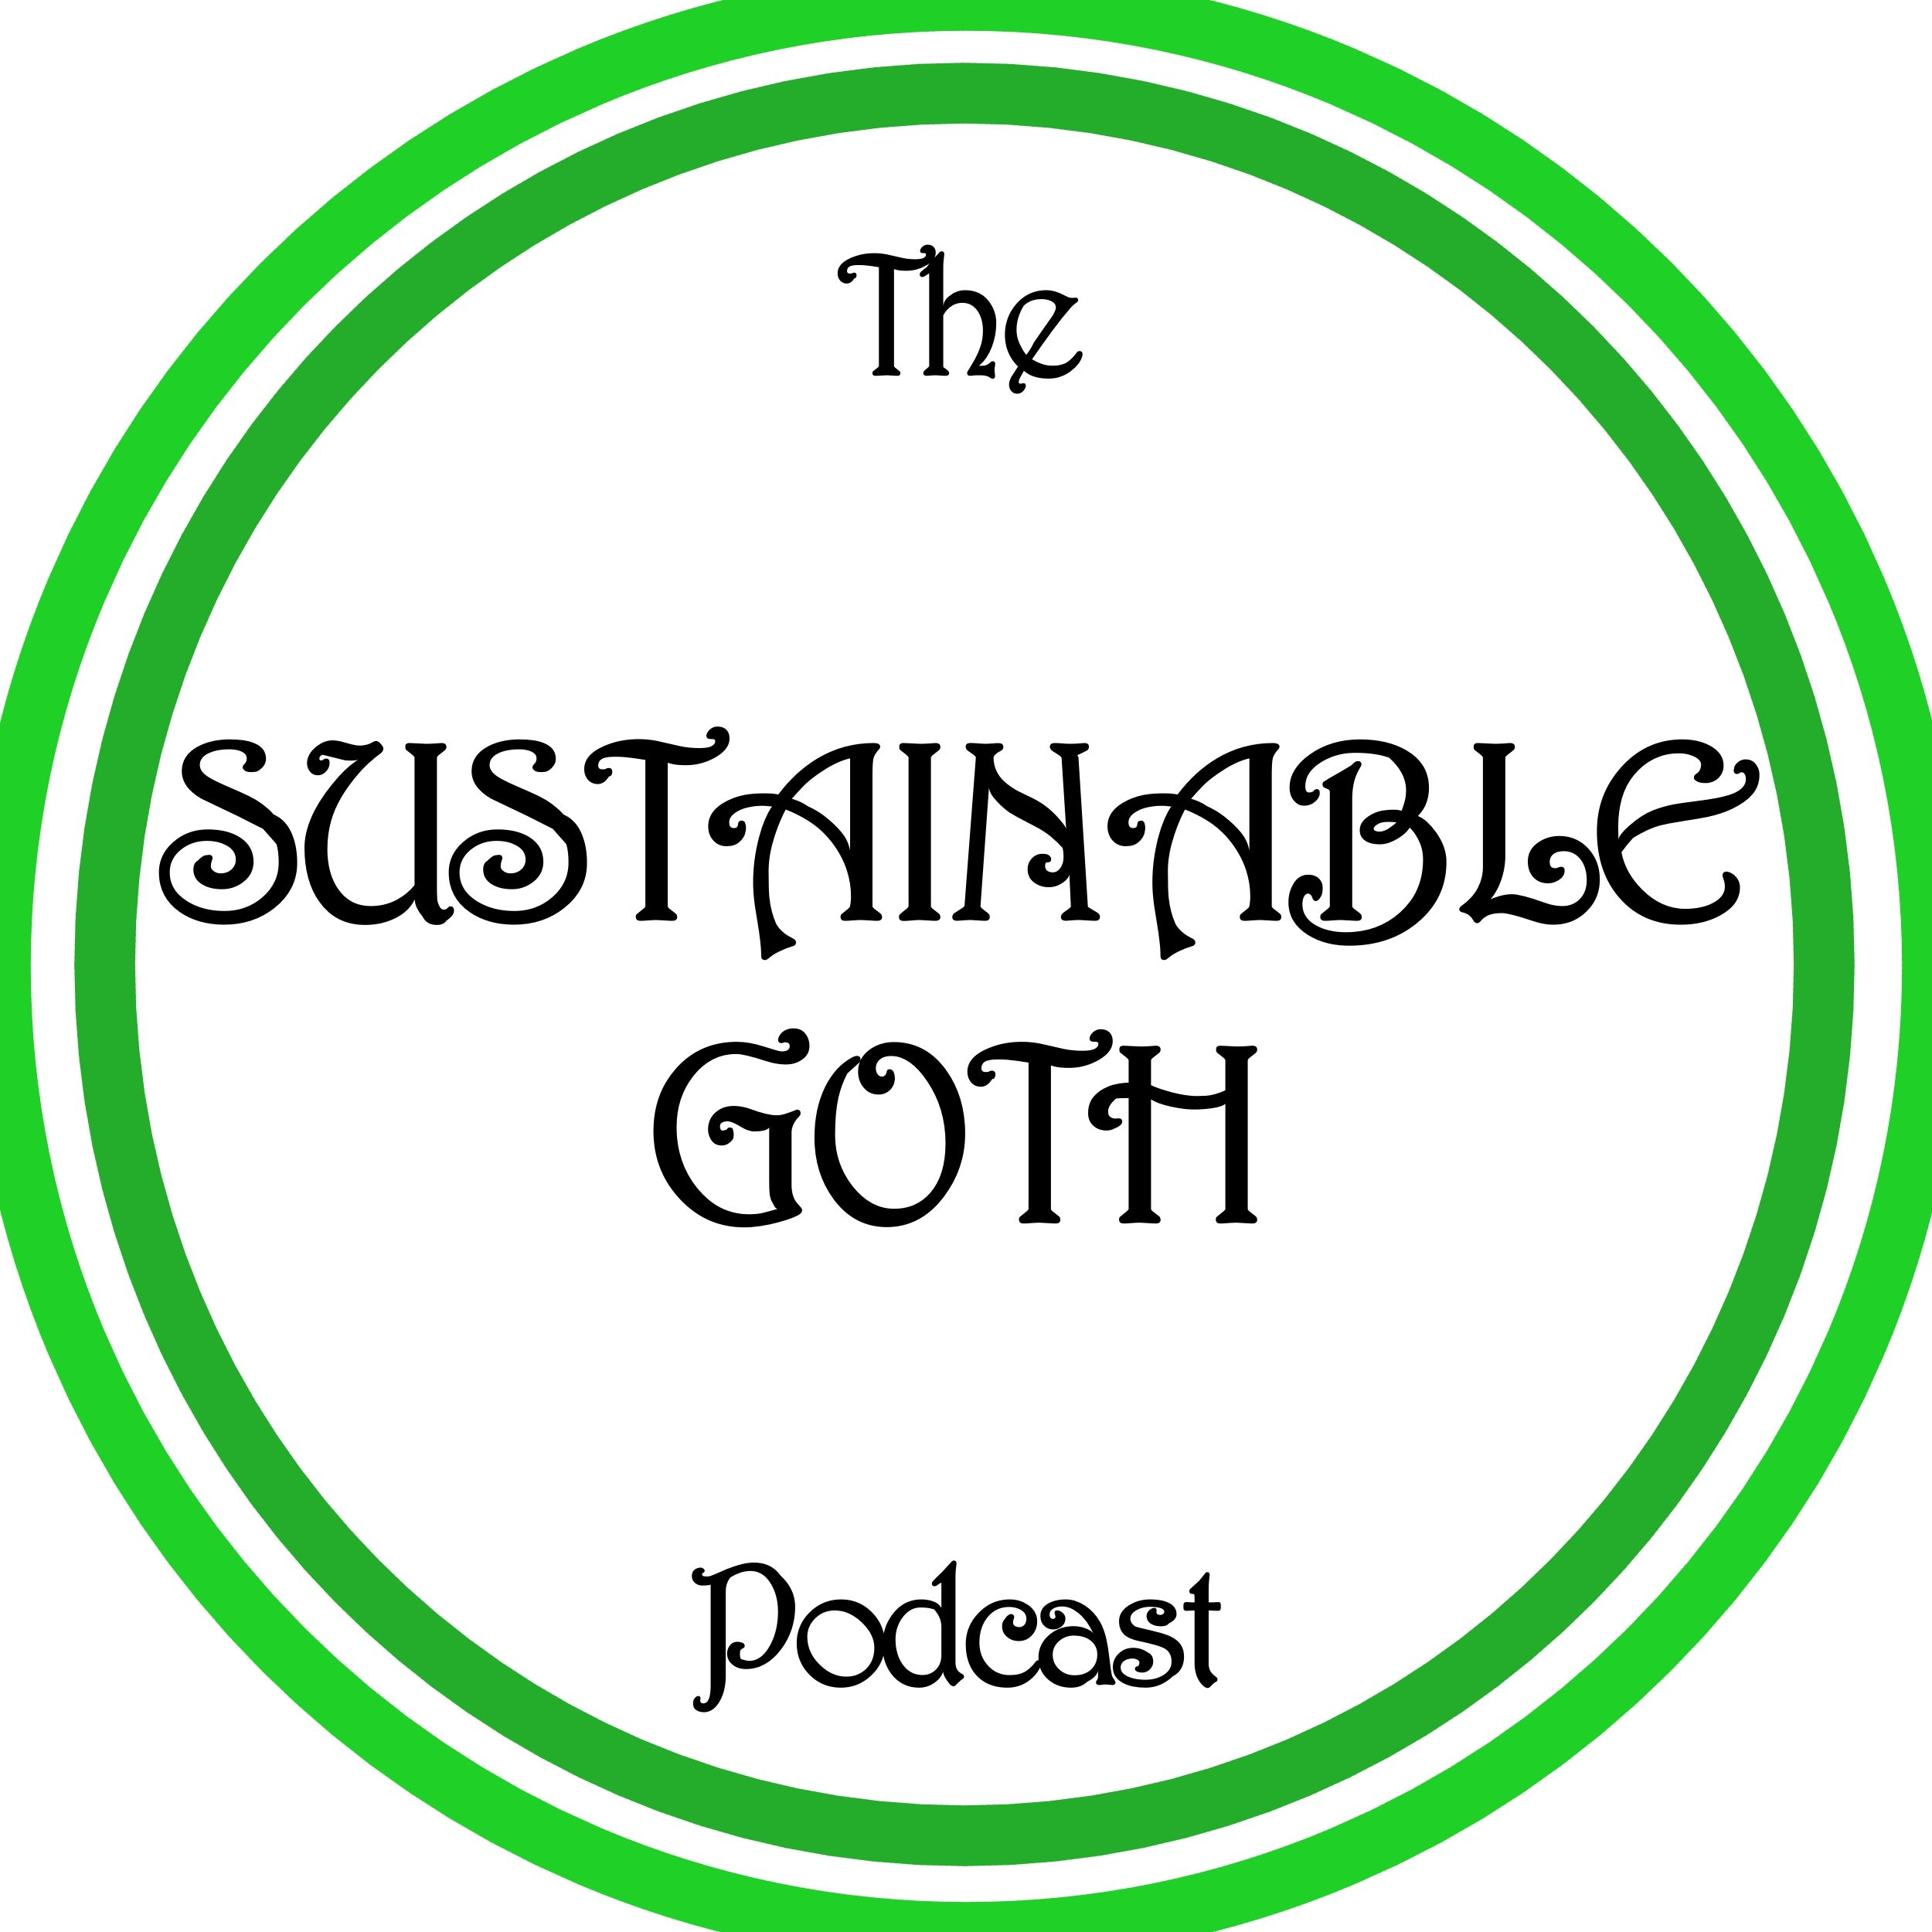 The Sustainable Goth